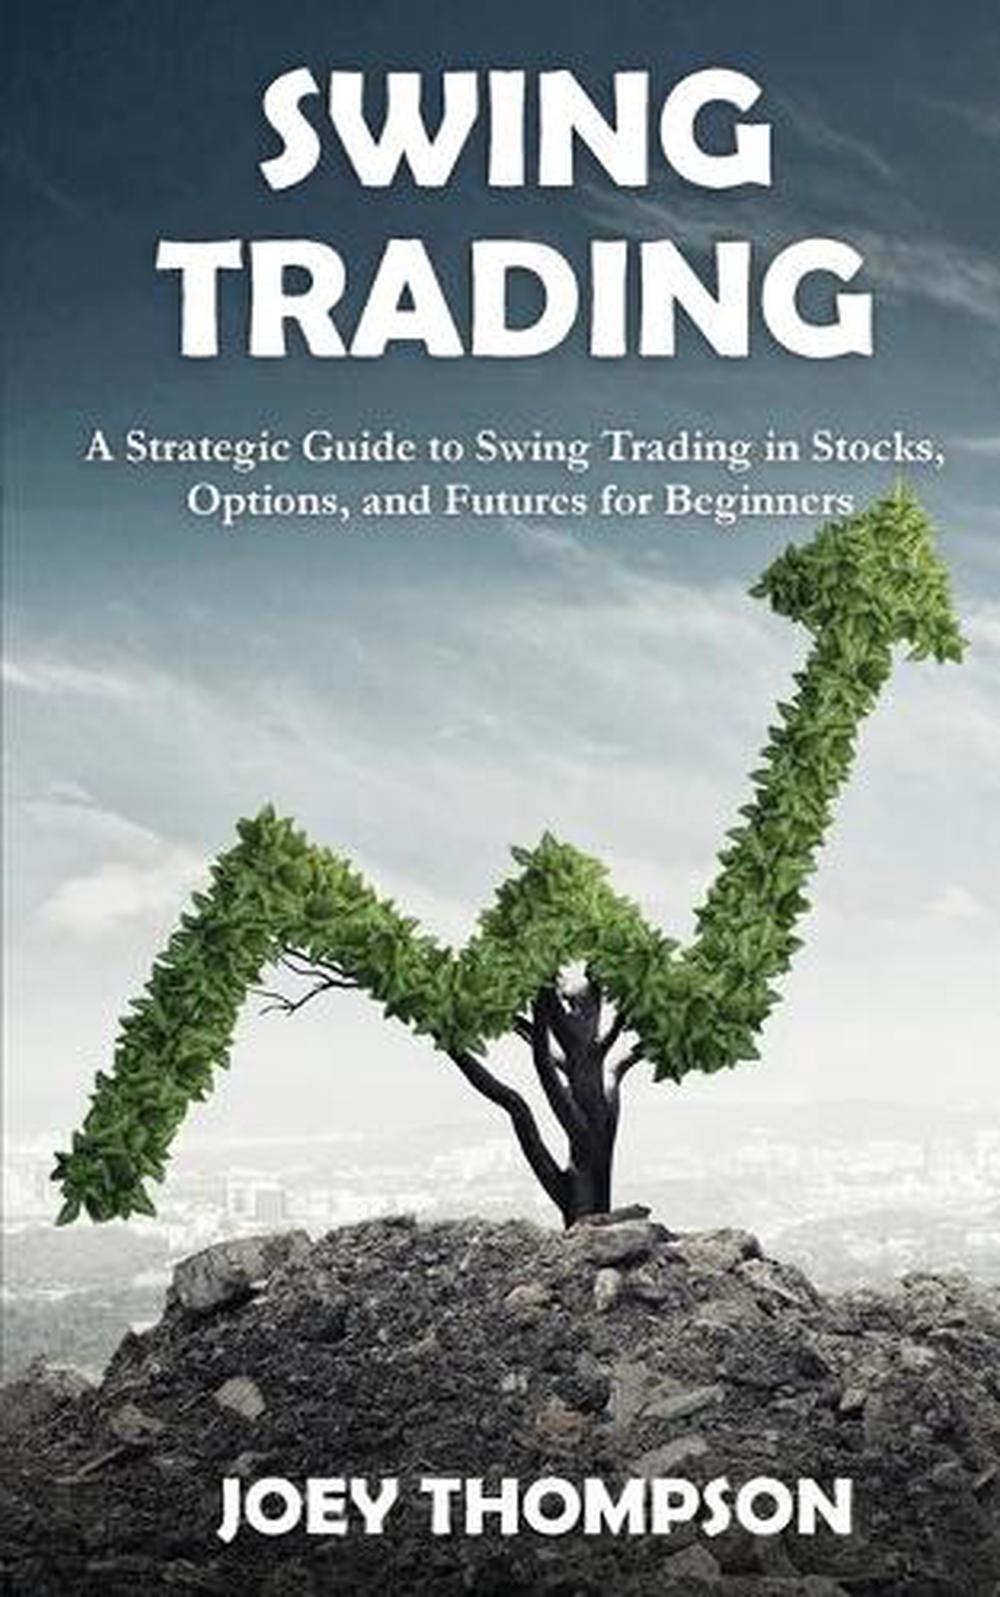 Swing Trading by Thompson Joey Thompson (English) Paperback Book Free